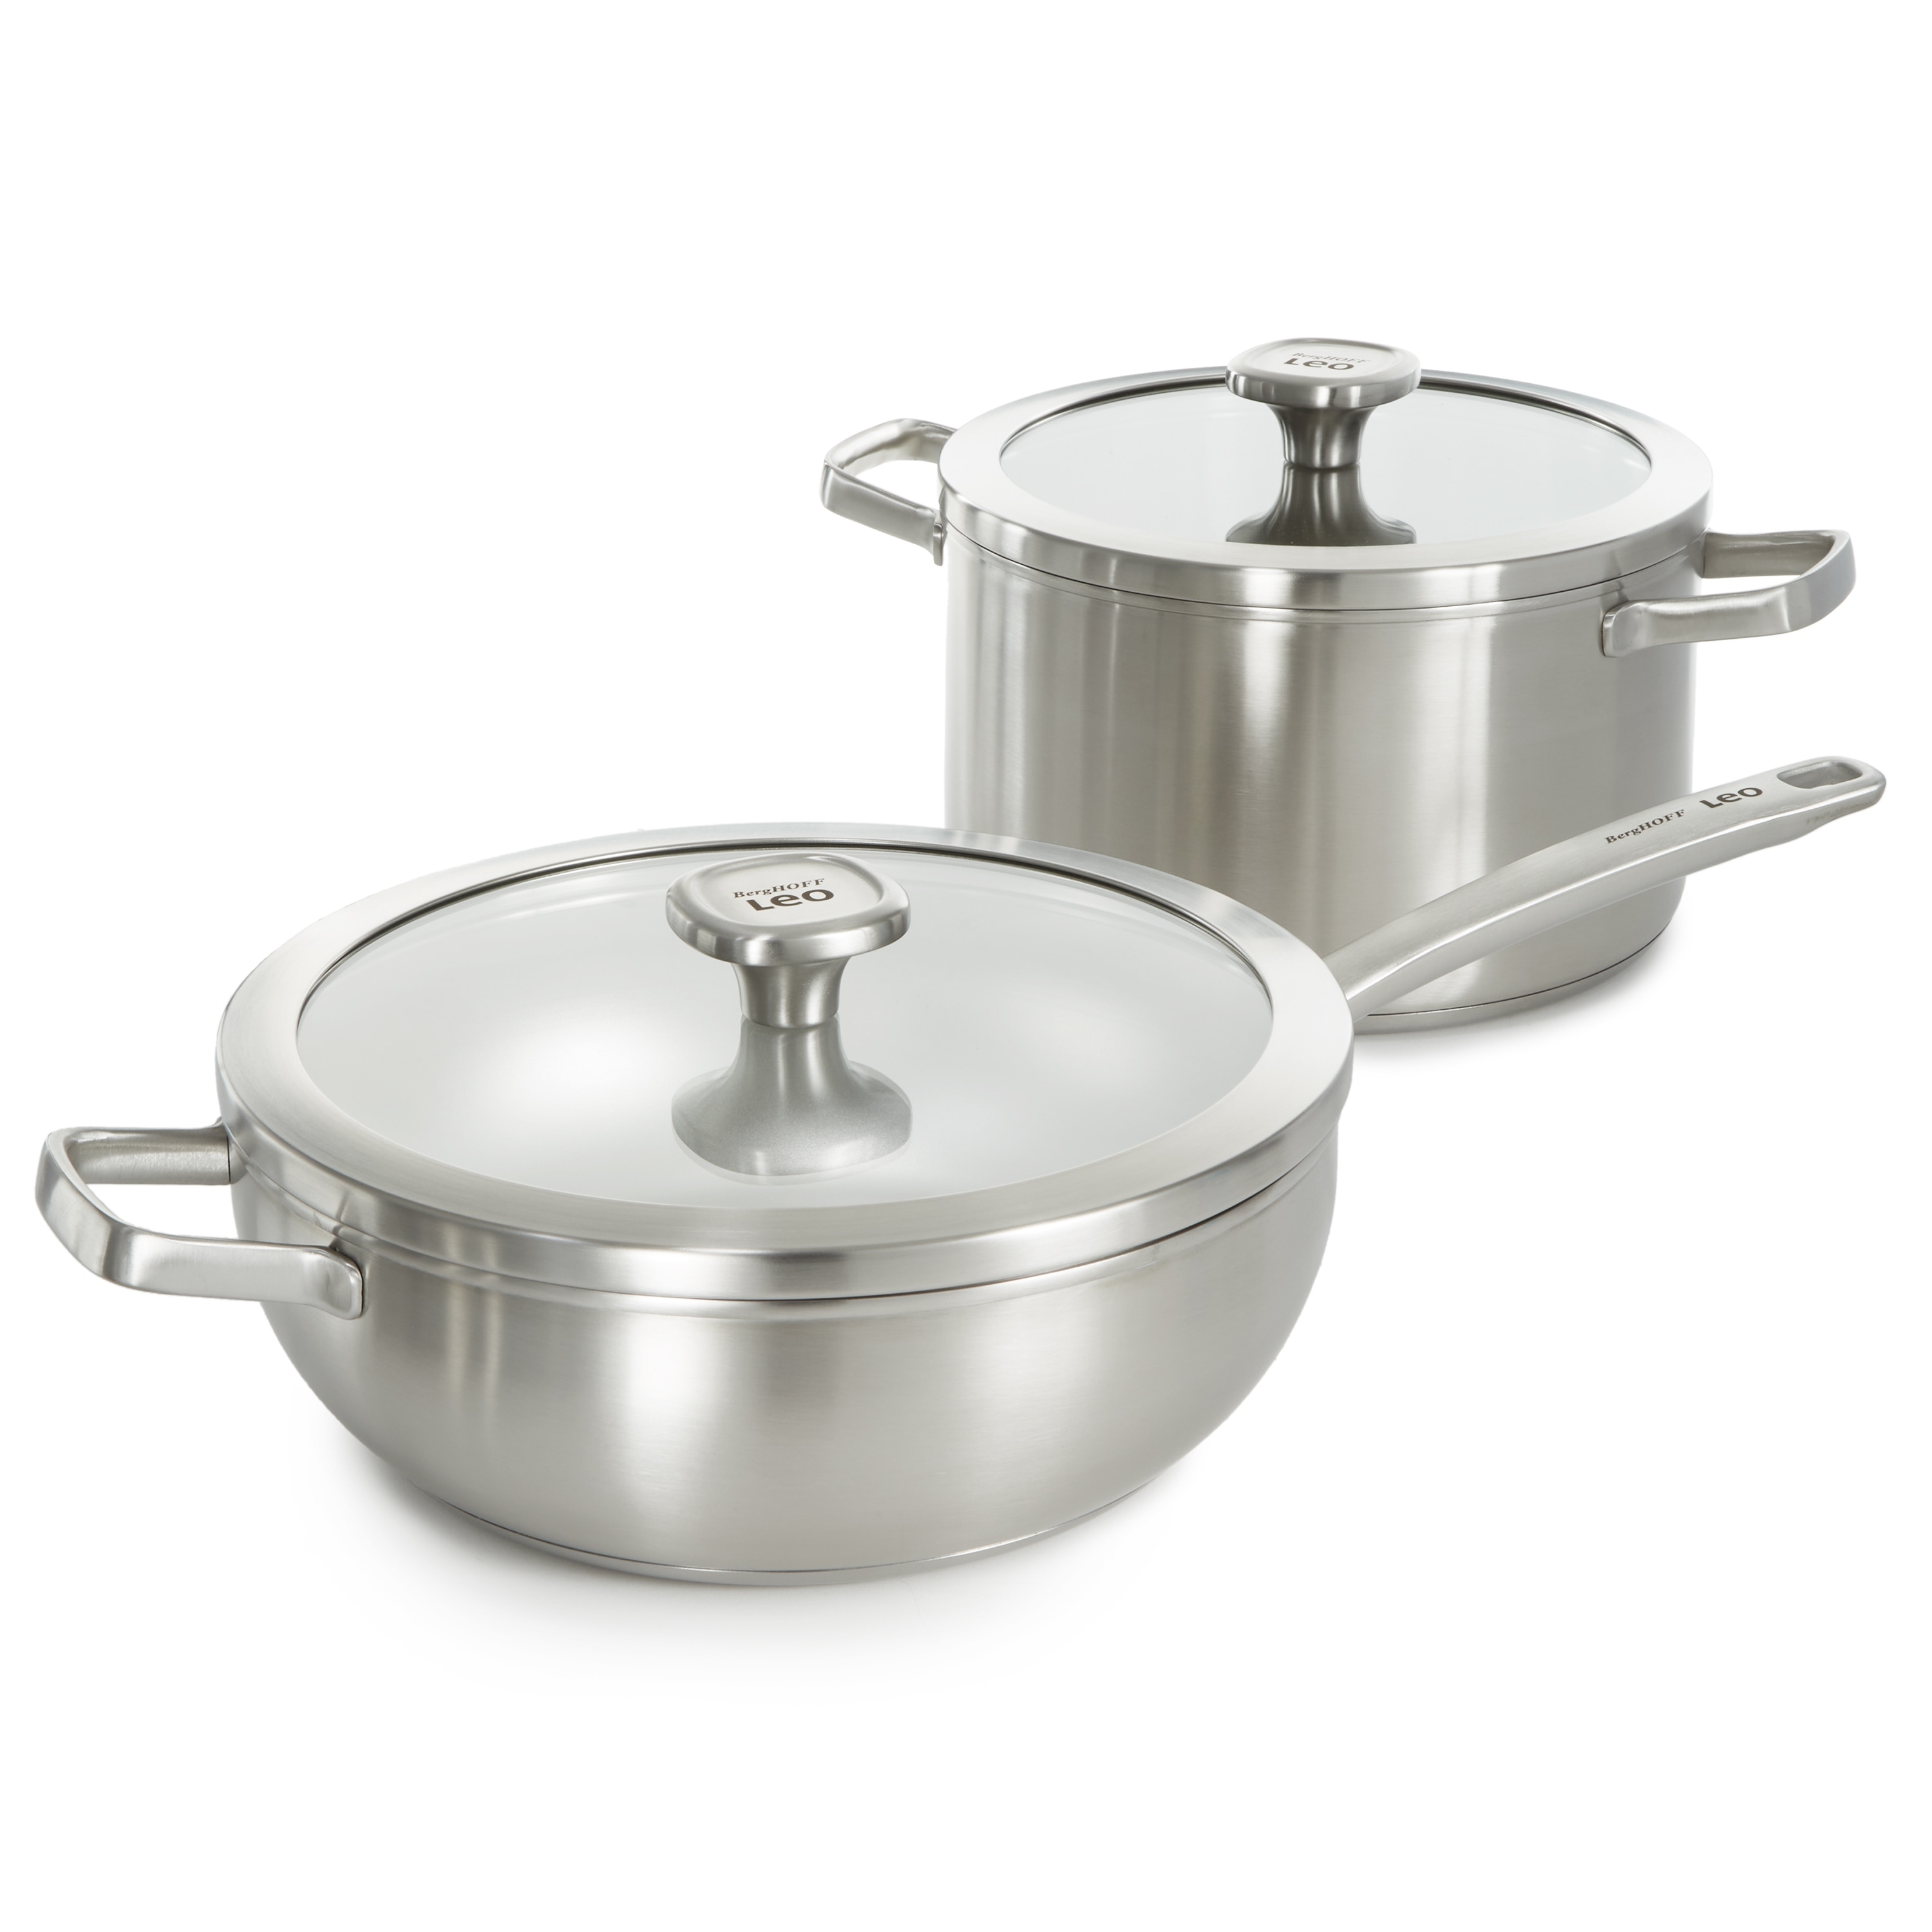 https://ak1.ostkcdn.com/images/products/is/images/direct/d483aad9430f6c9618d64b5fa53574c0e66ec8a2/BergHOFF-Graphite-4Pc-Cookware-Set%2C-Glass-Lids%2C-Recycled-18-10-Stainless-Steel.jpg